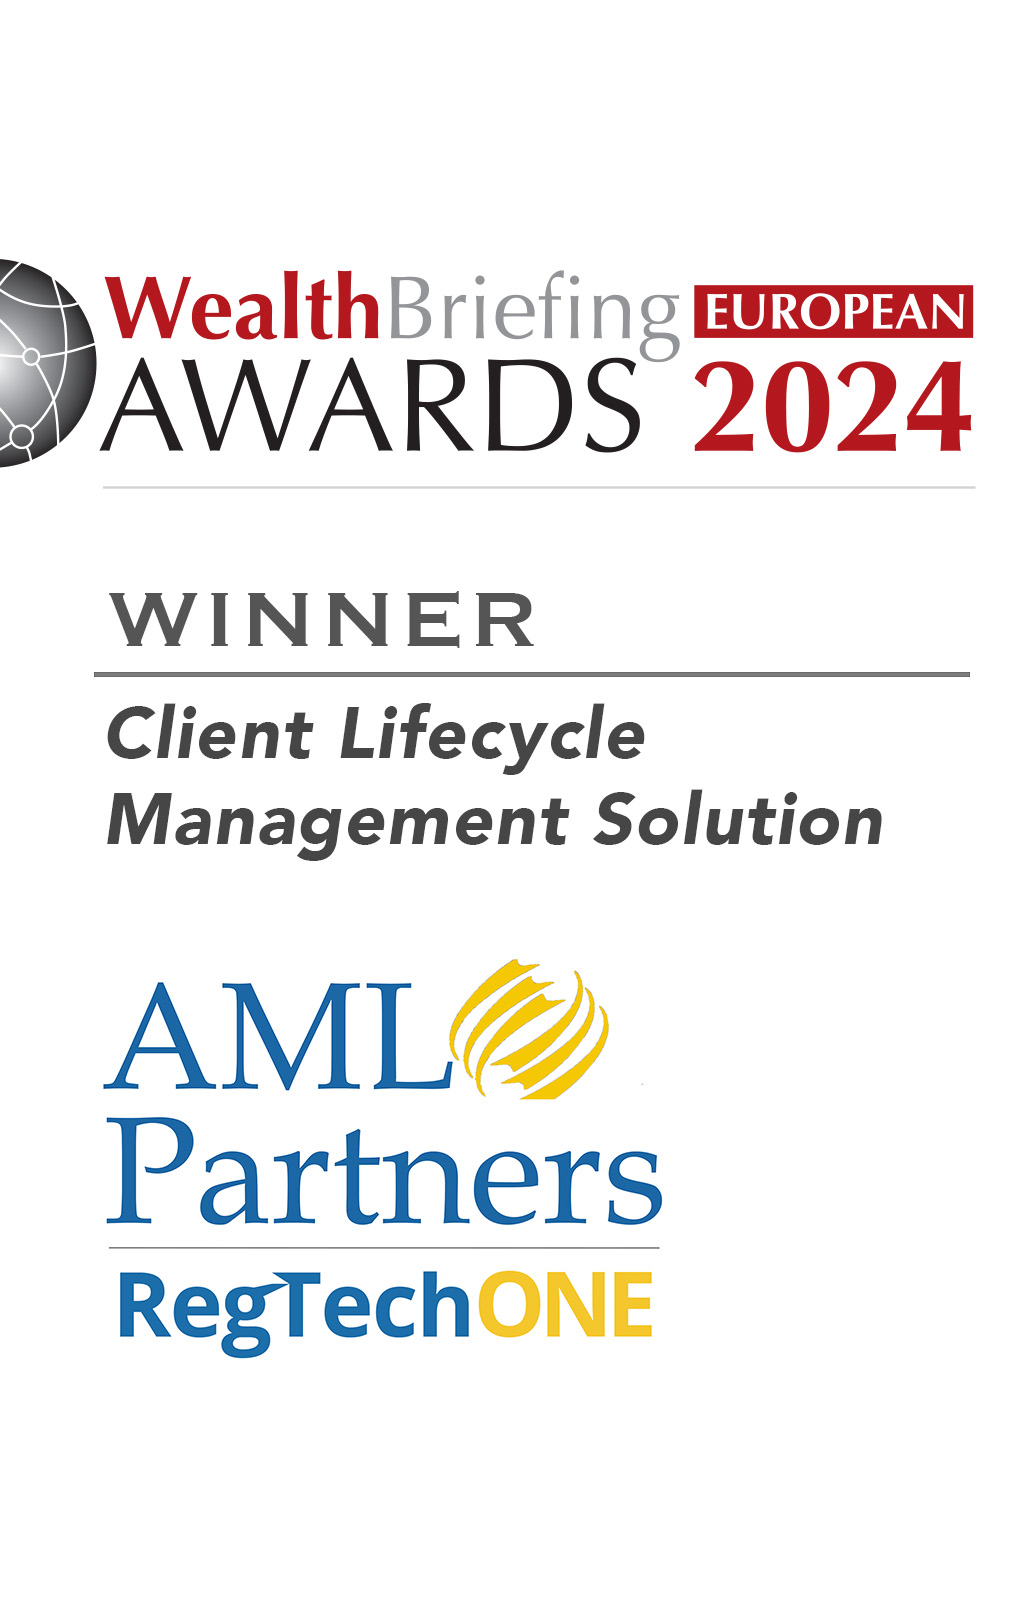 Art shows the logo of the WealthBriefing European awards program for 2024 and the logo of AML Partners and their RegTechONE platform for AML Compliance, GRC, KYC/CDD onboarding, and related Risk Management.